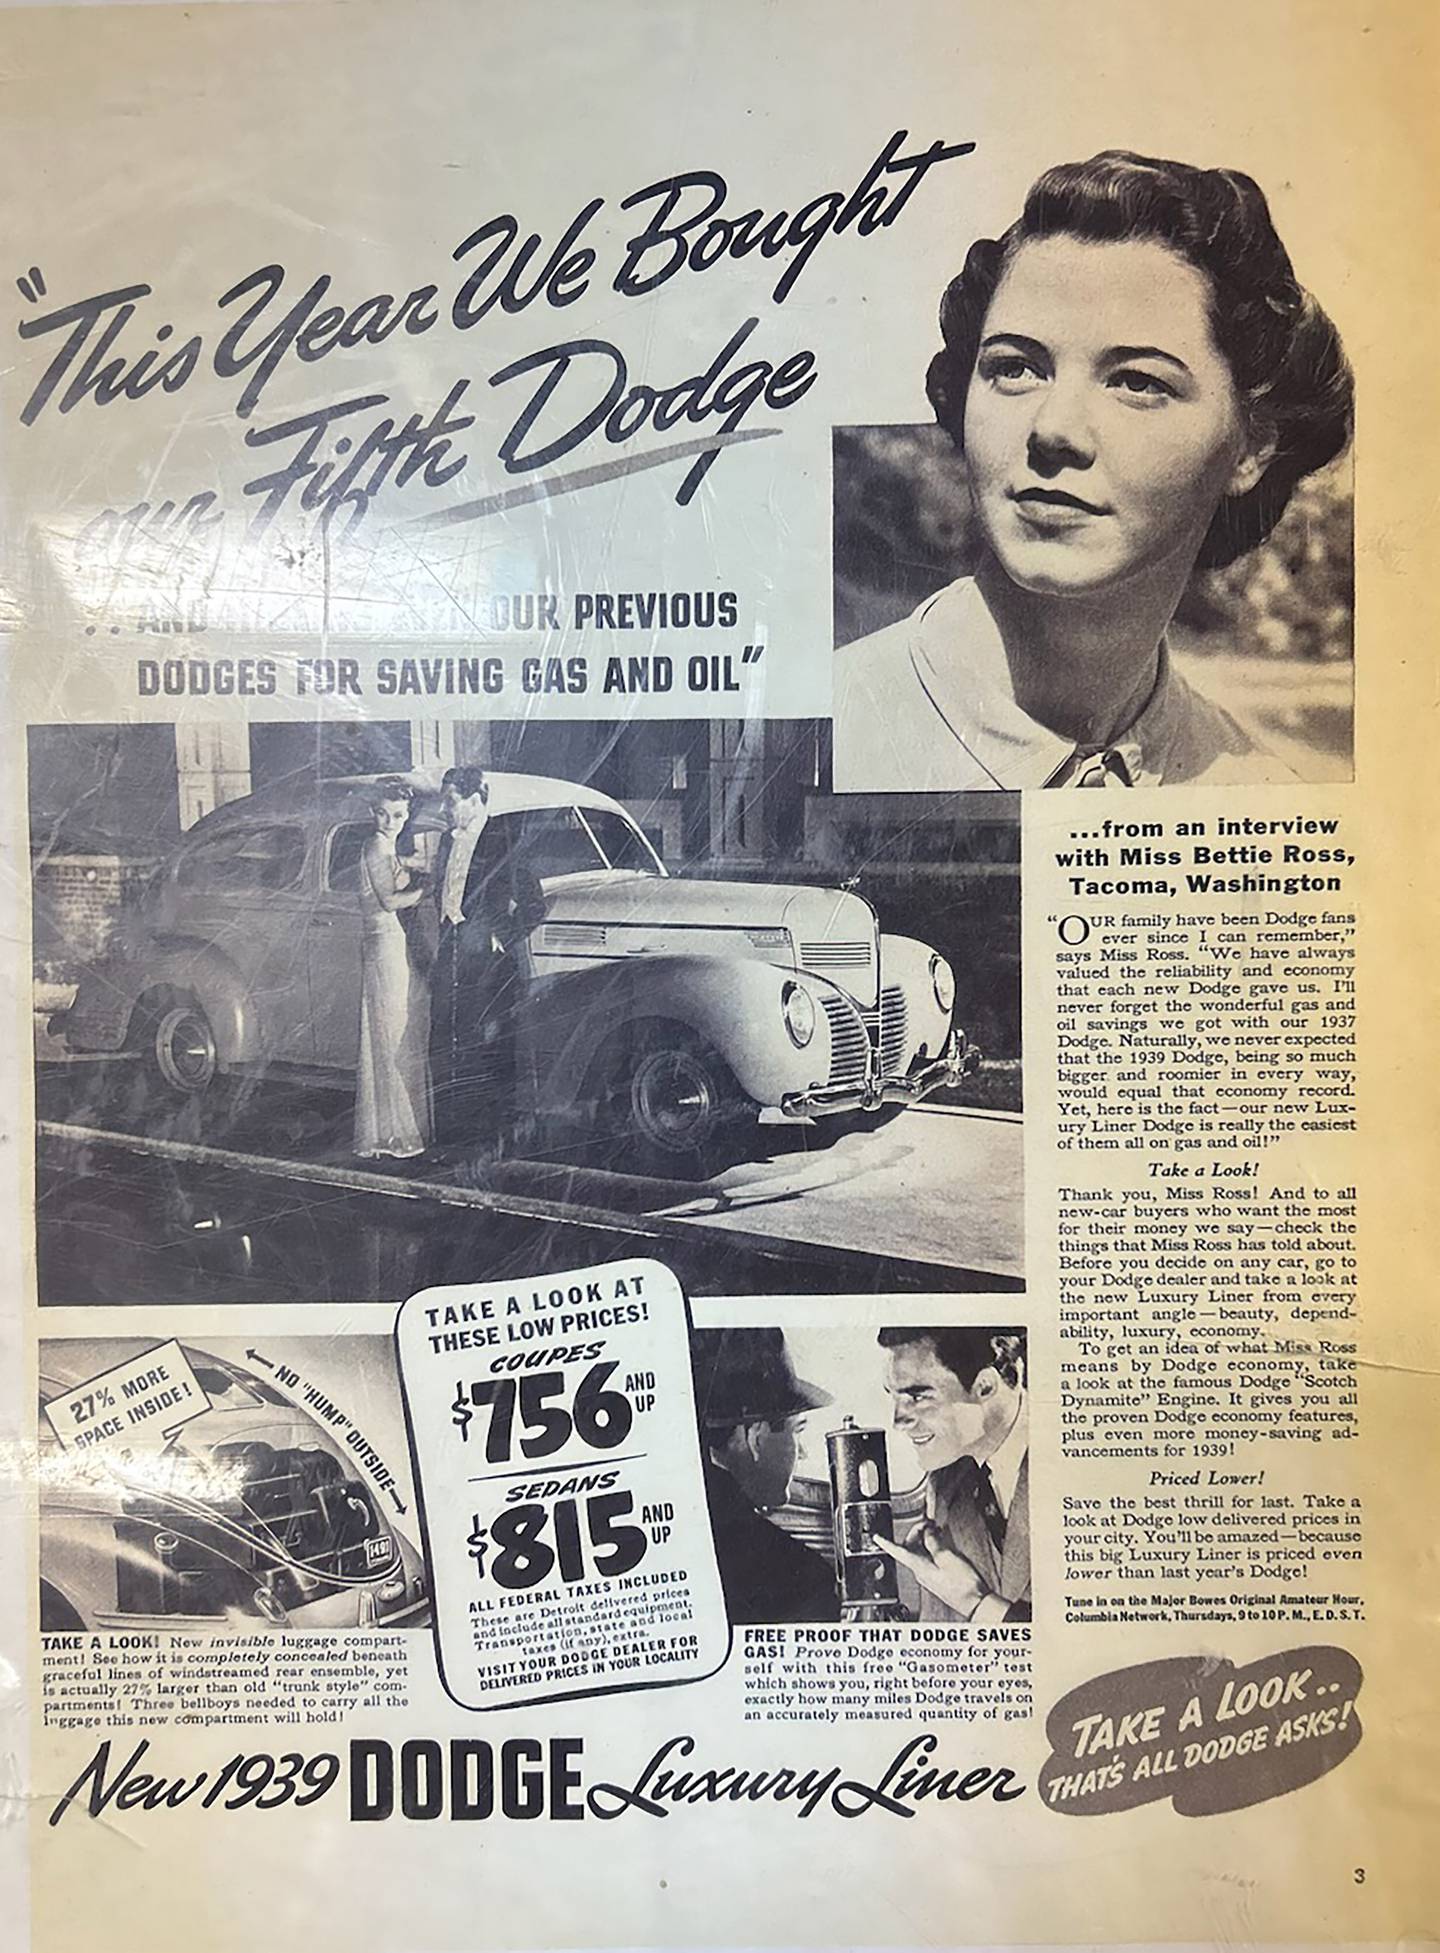 Photos by Rudy Host, Jr. - 1939 Dodge Luxury Liner Ad